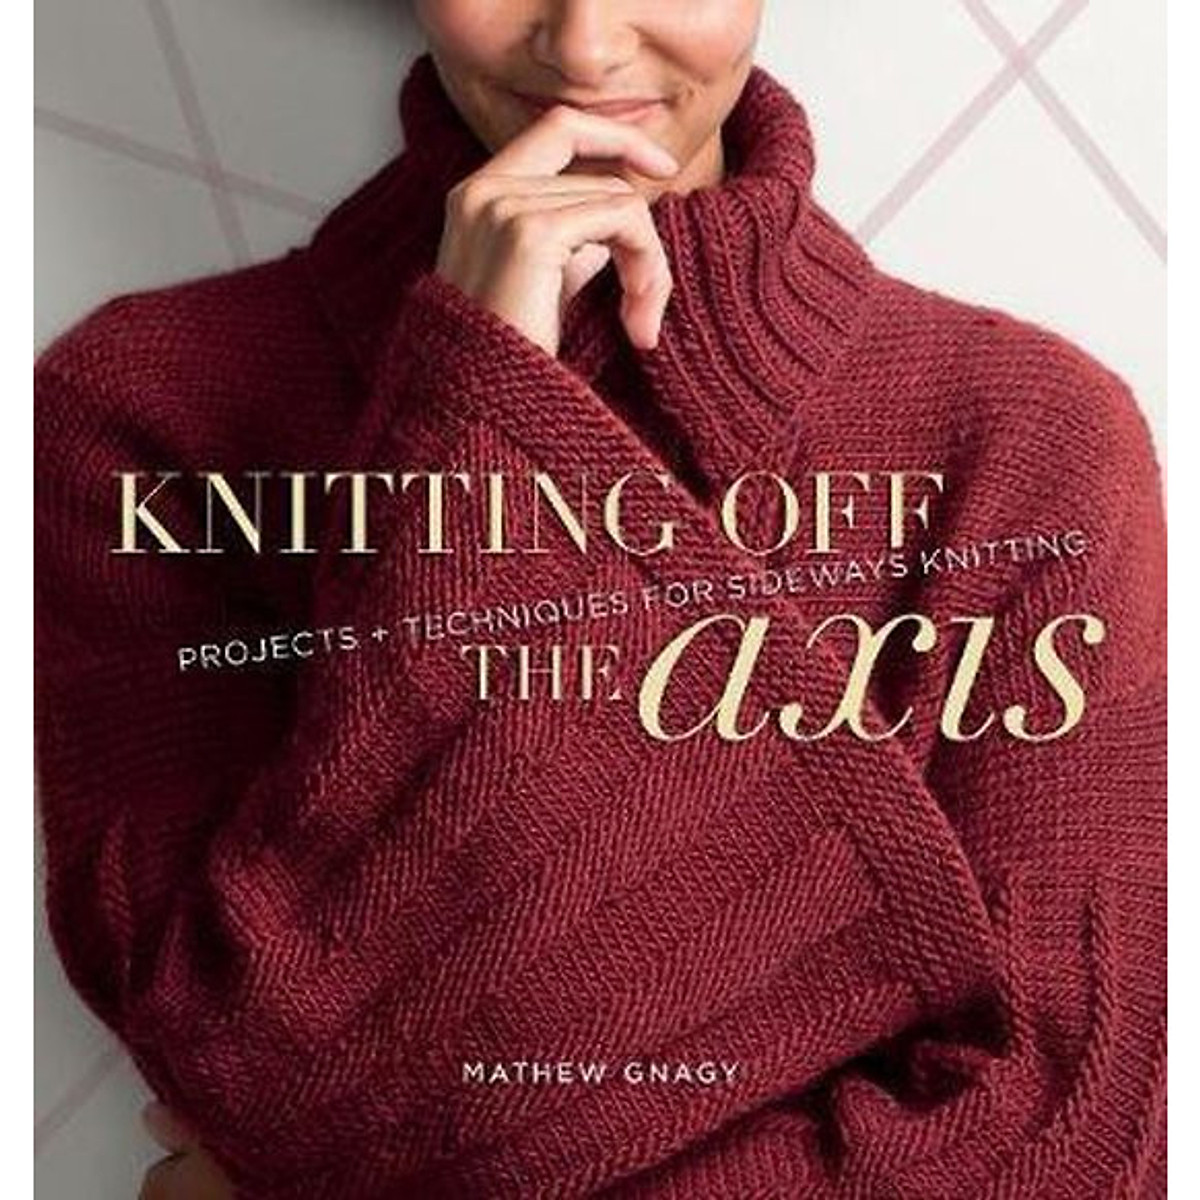 Knitting Off the Axis